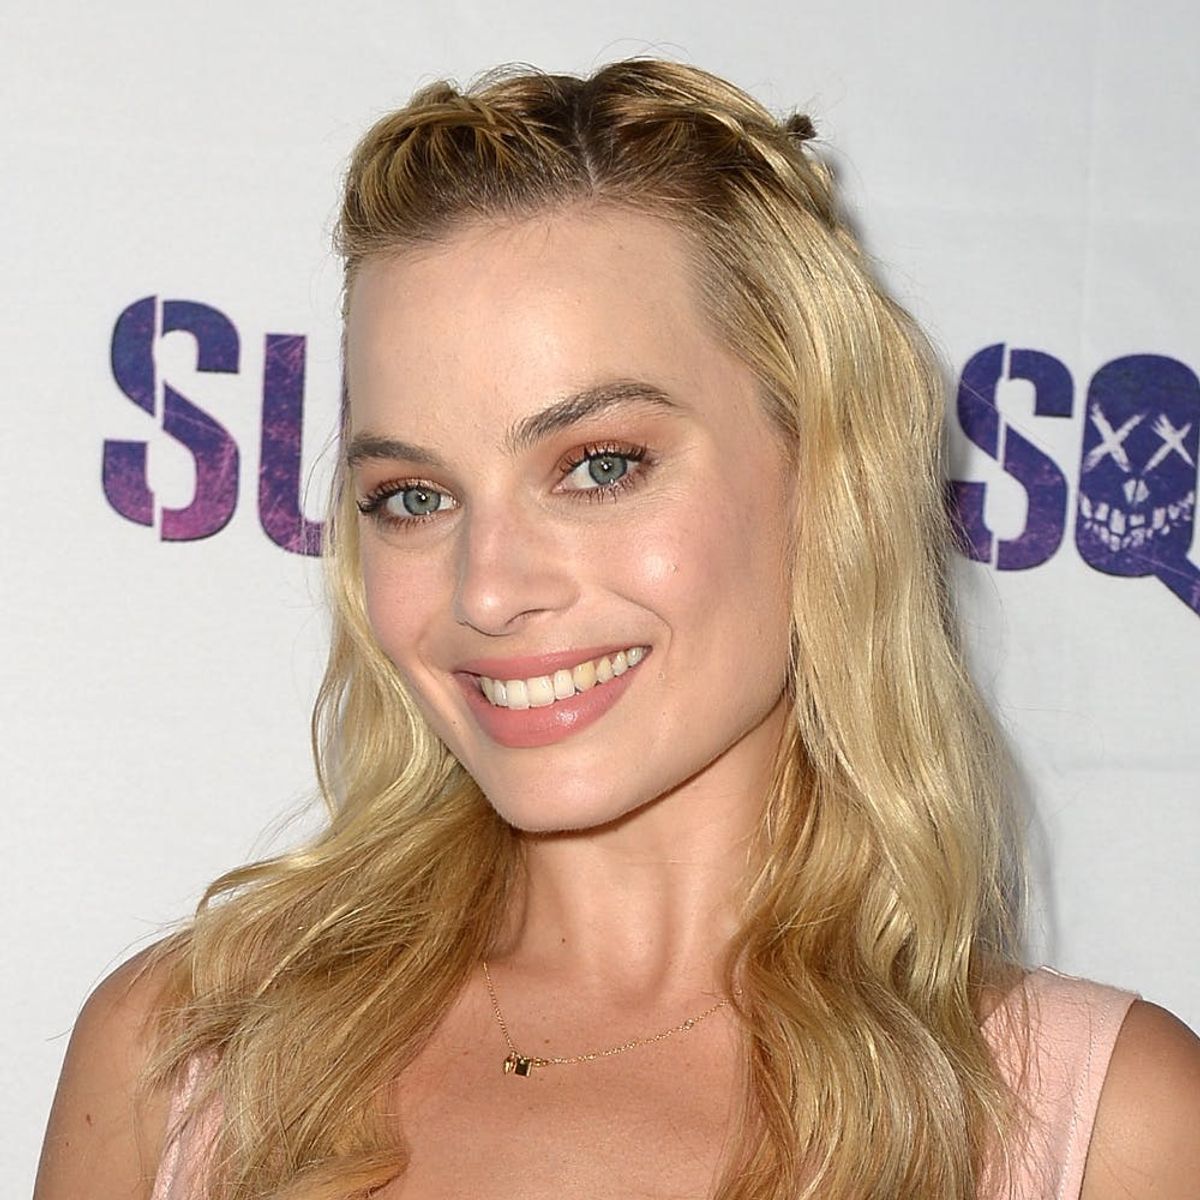 Margot Robbie Straight Up Wore a *Magical* Unicorn to Her Suicide Squad Premiere